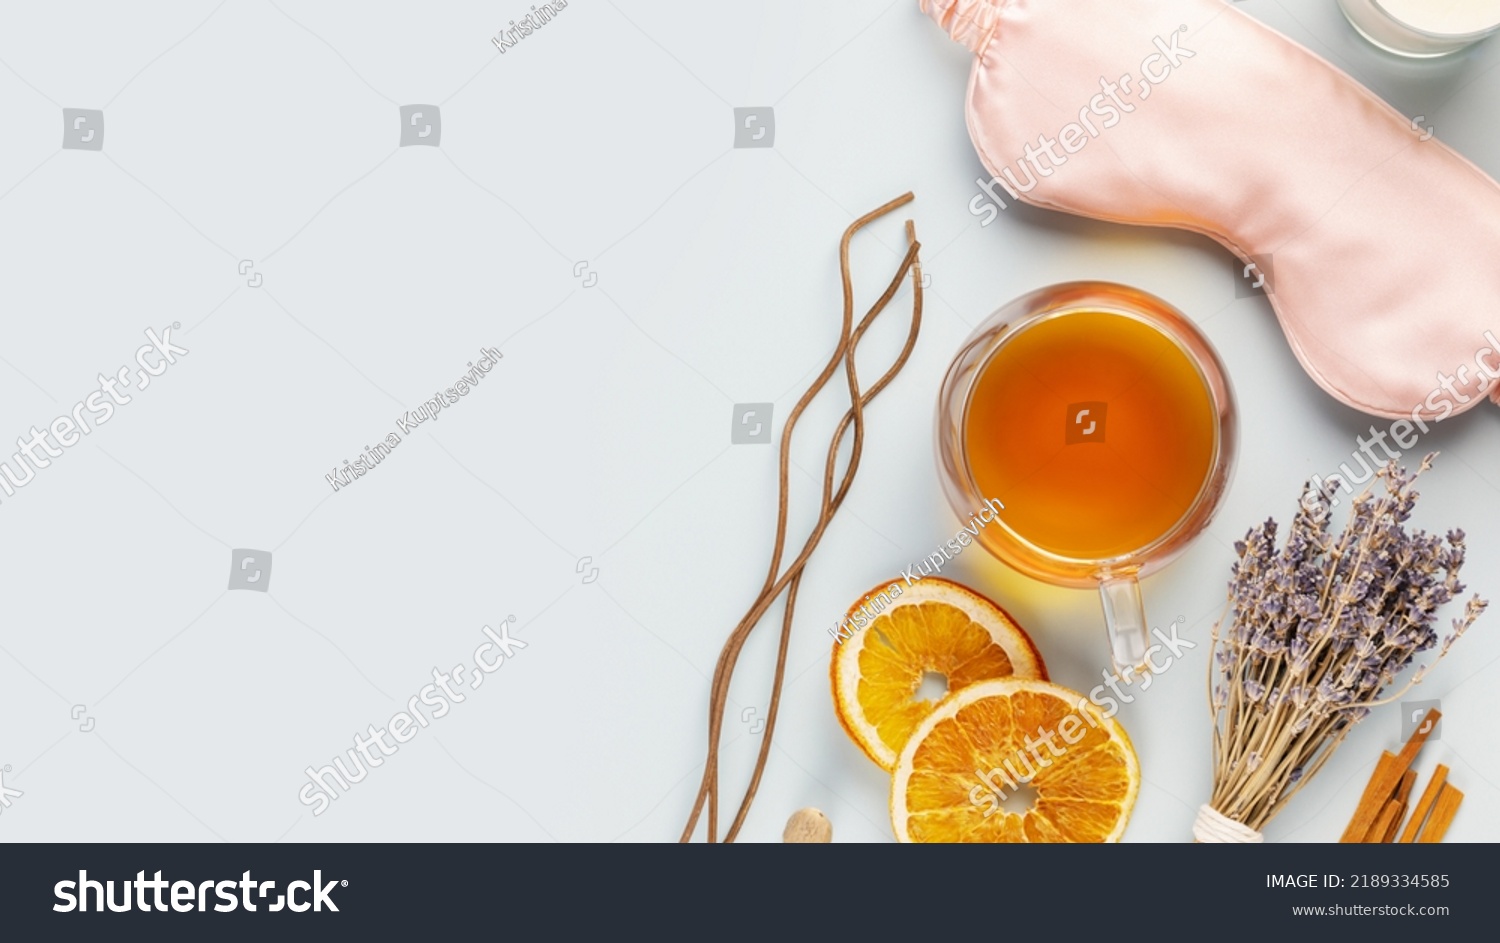 Concept of Me time and no depression. Self-care flat lay with sleep mask, lavender flower, herbal tea, dry fruits and aroma sticks on a blue background with copy space. Healthy sleep is healthy life #2189334585